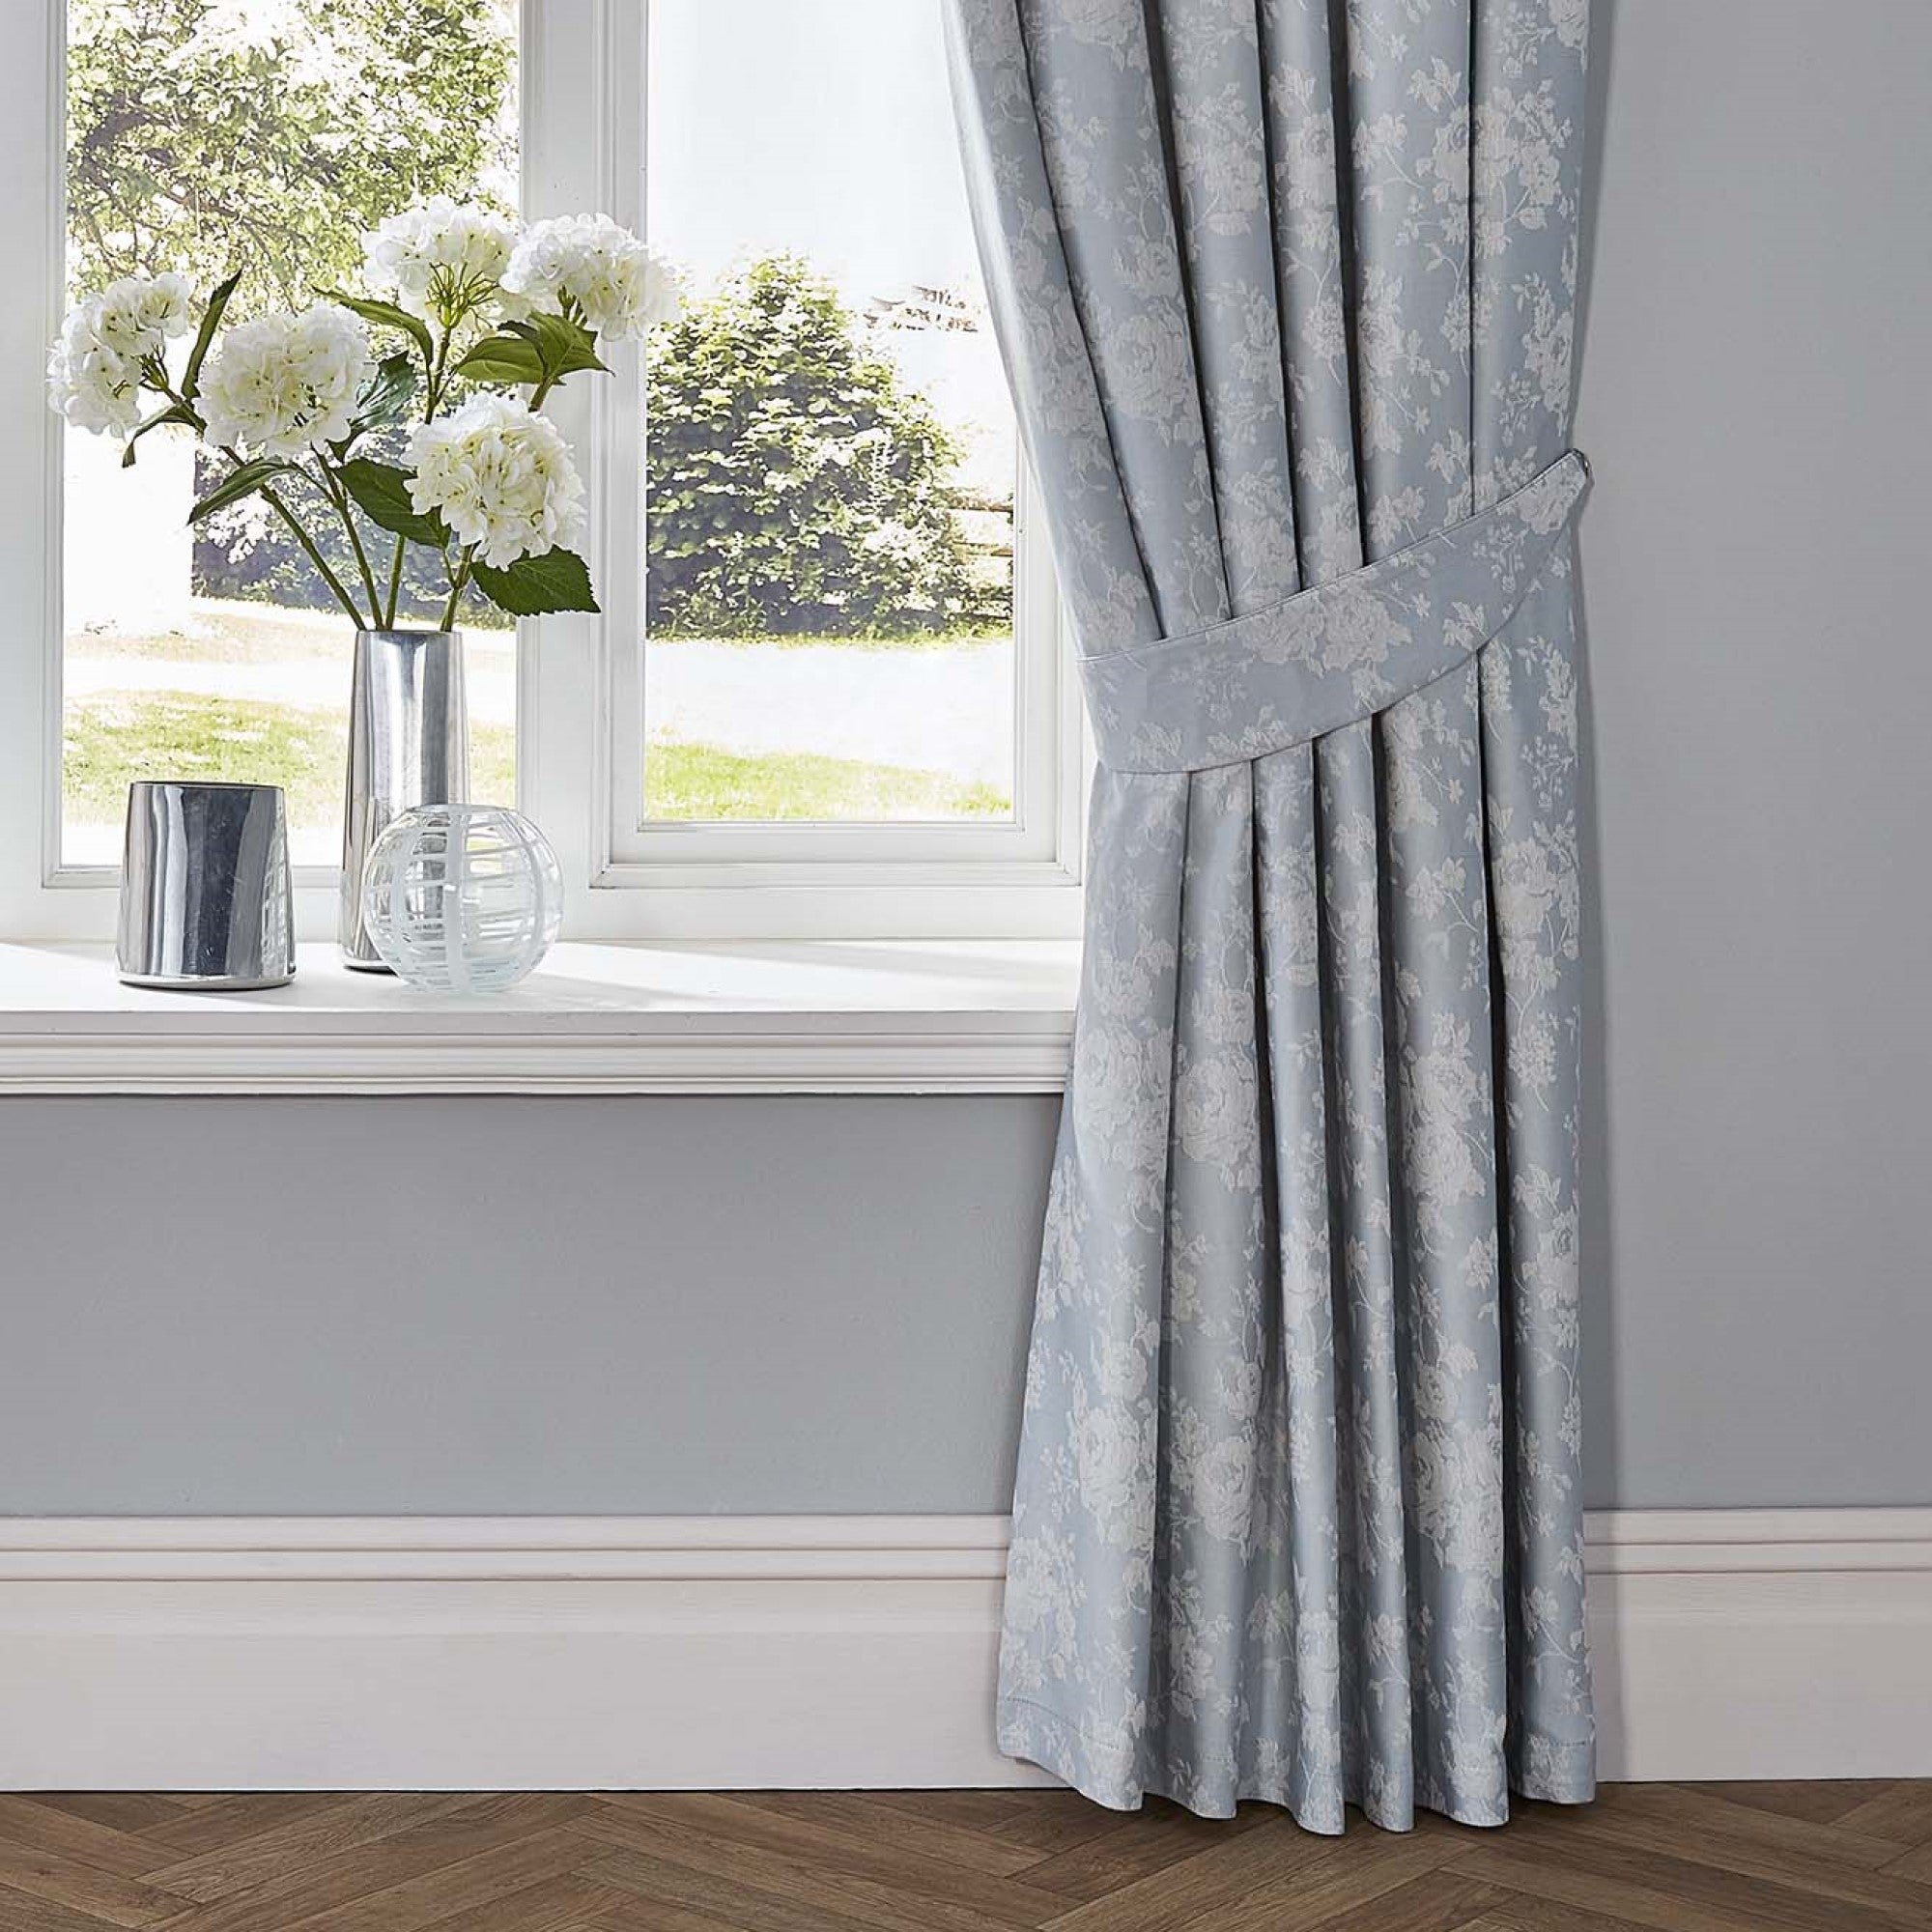 Pair of Pencil Pleat Curtains With Tie-Backs Imelda by Dreams & Drapes Woven in Duck Egg